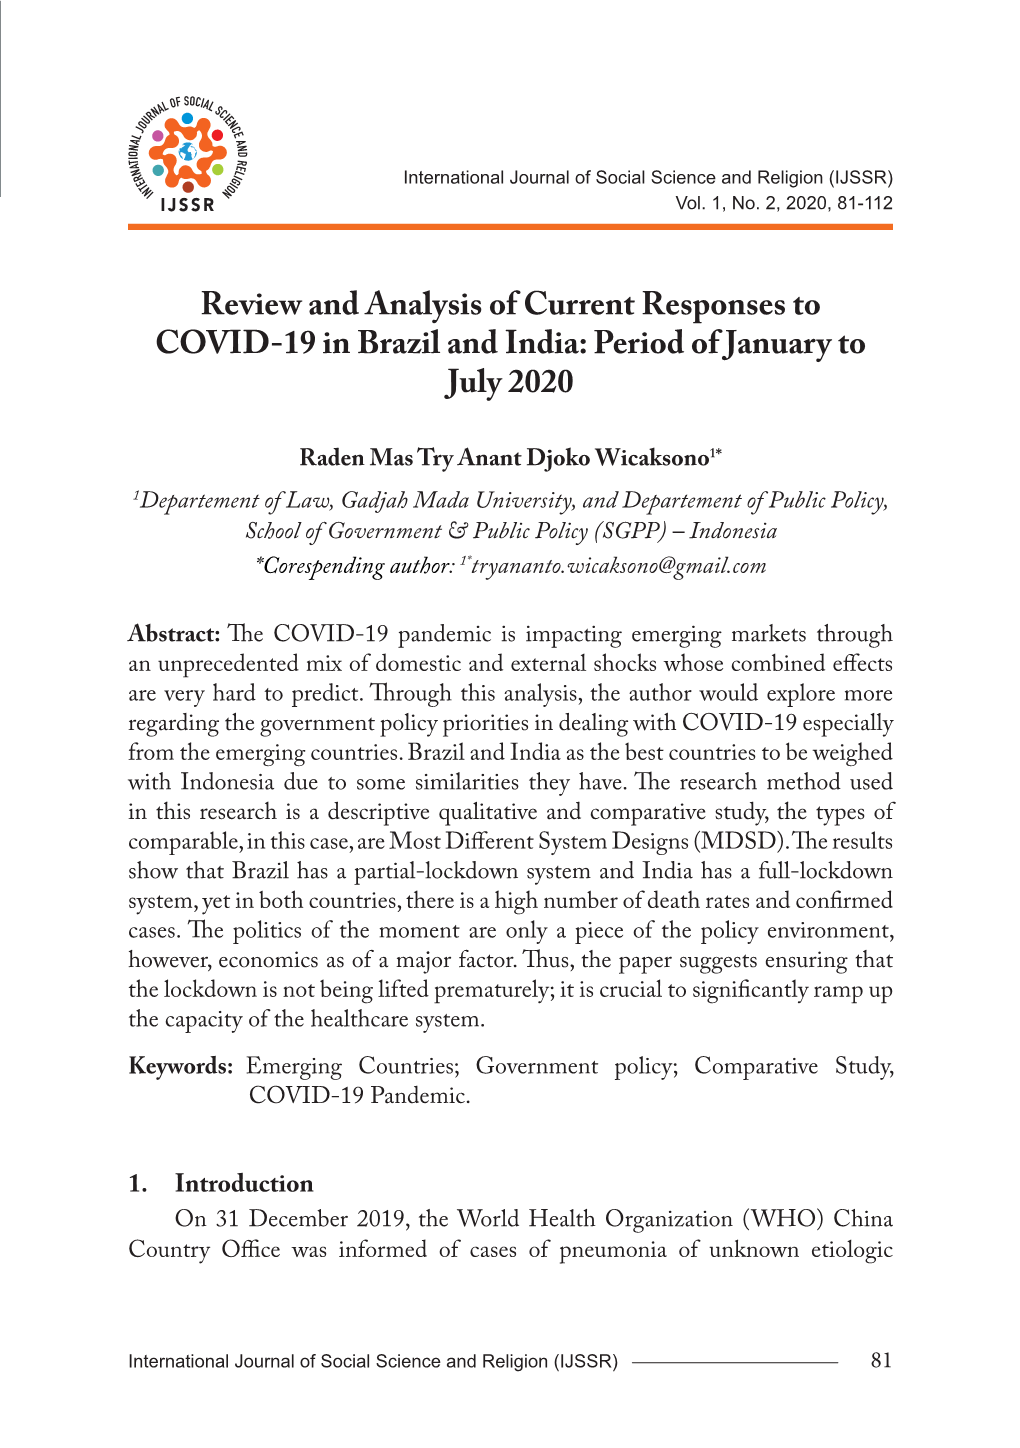 Review and Analysis of Current Responses to COVID-19 in Brazil and India: Period of January to July 2020